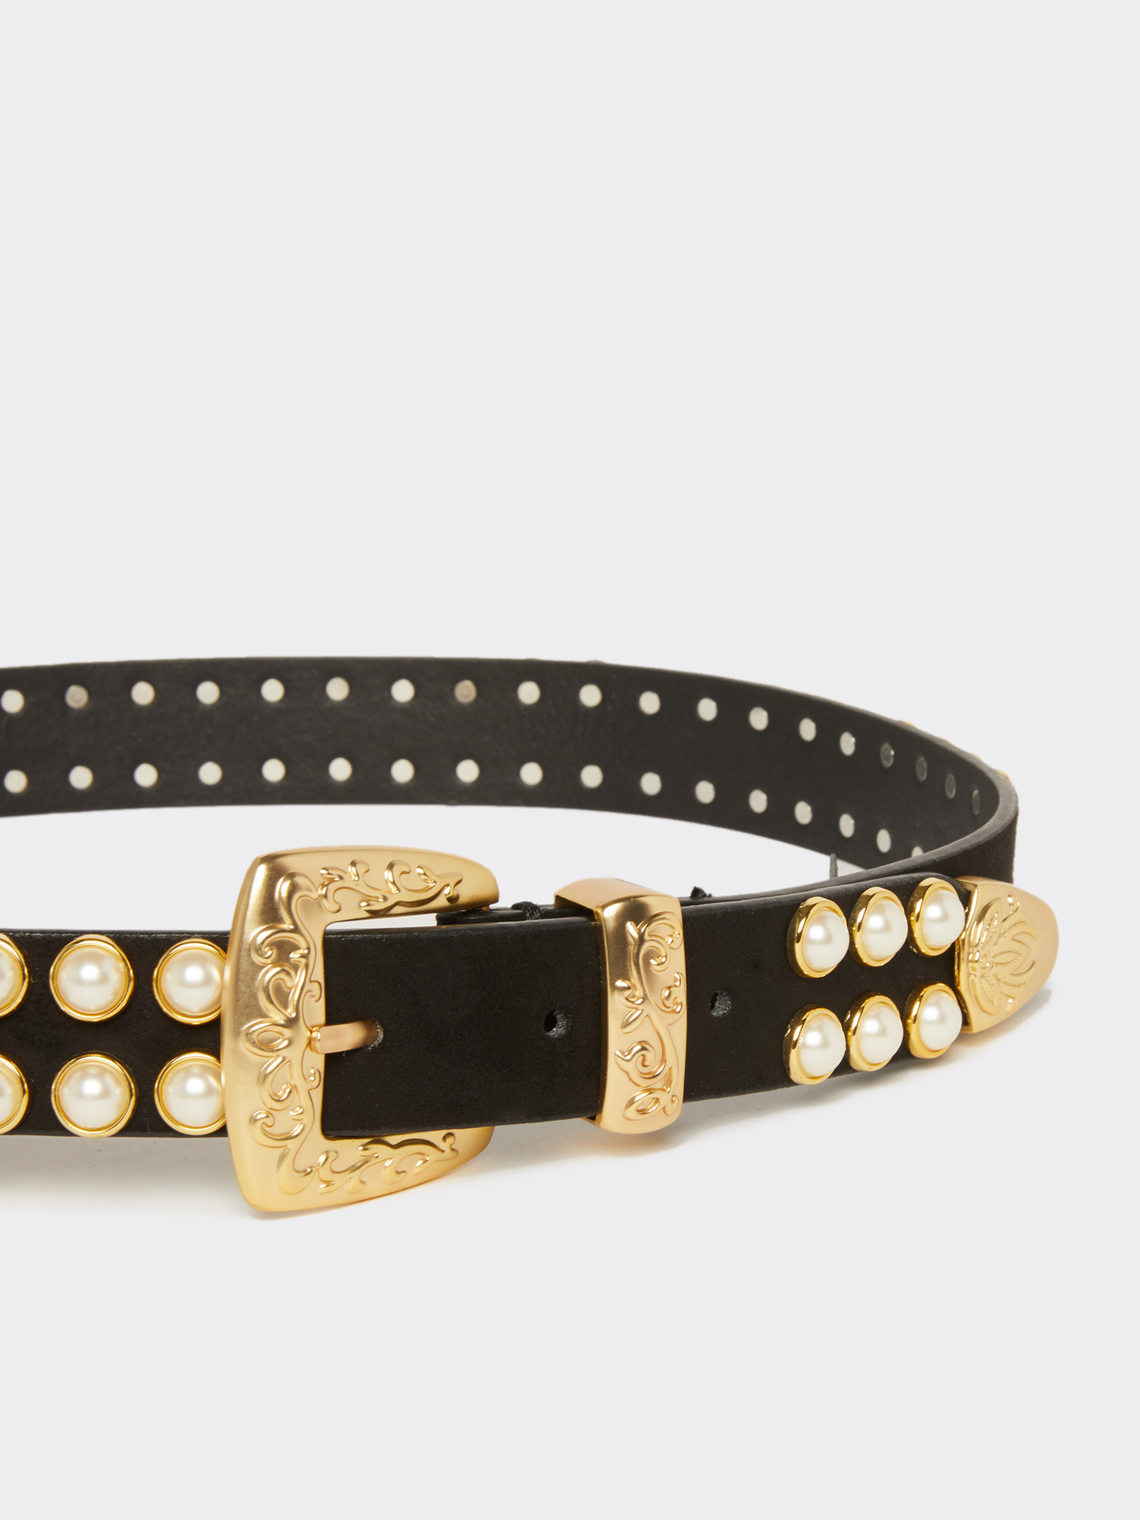 Faux leather belt with pearls - Motivi.com - GB